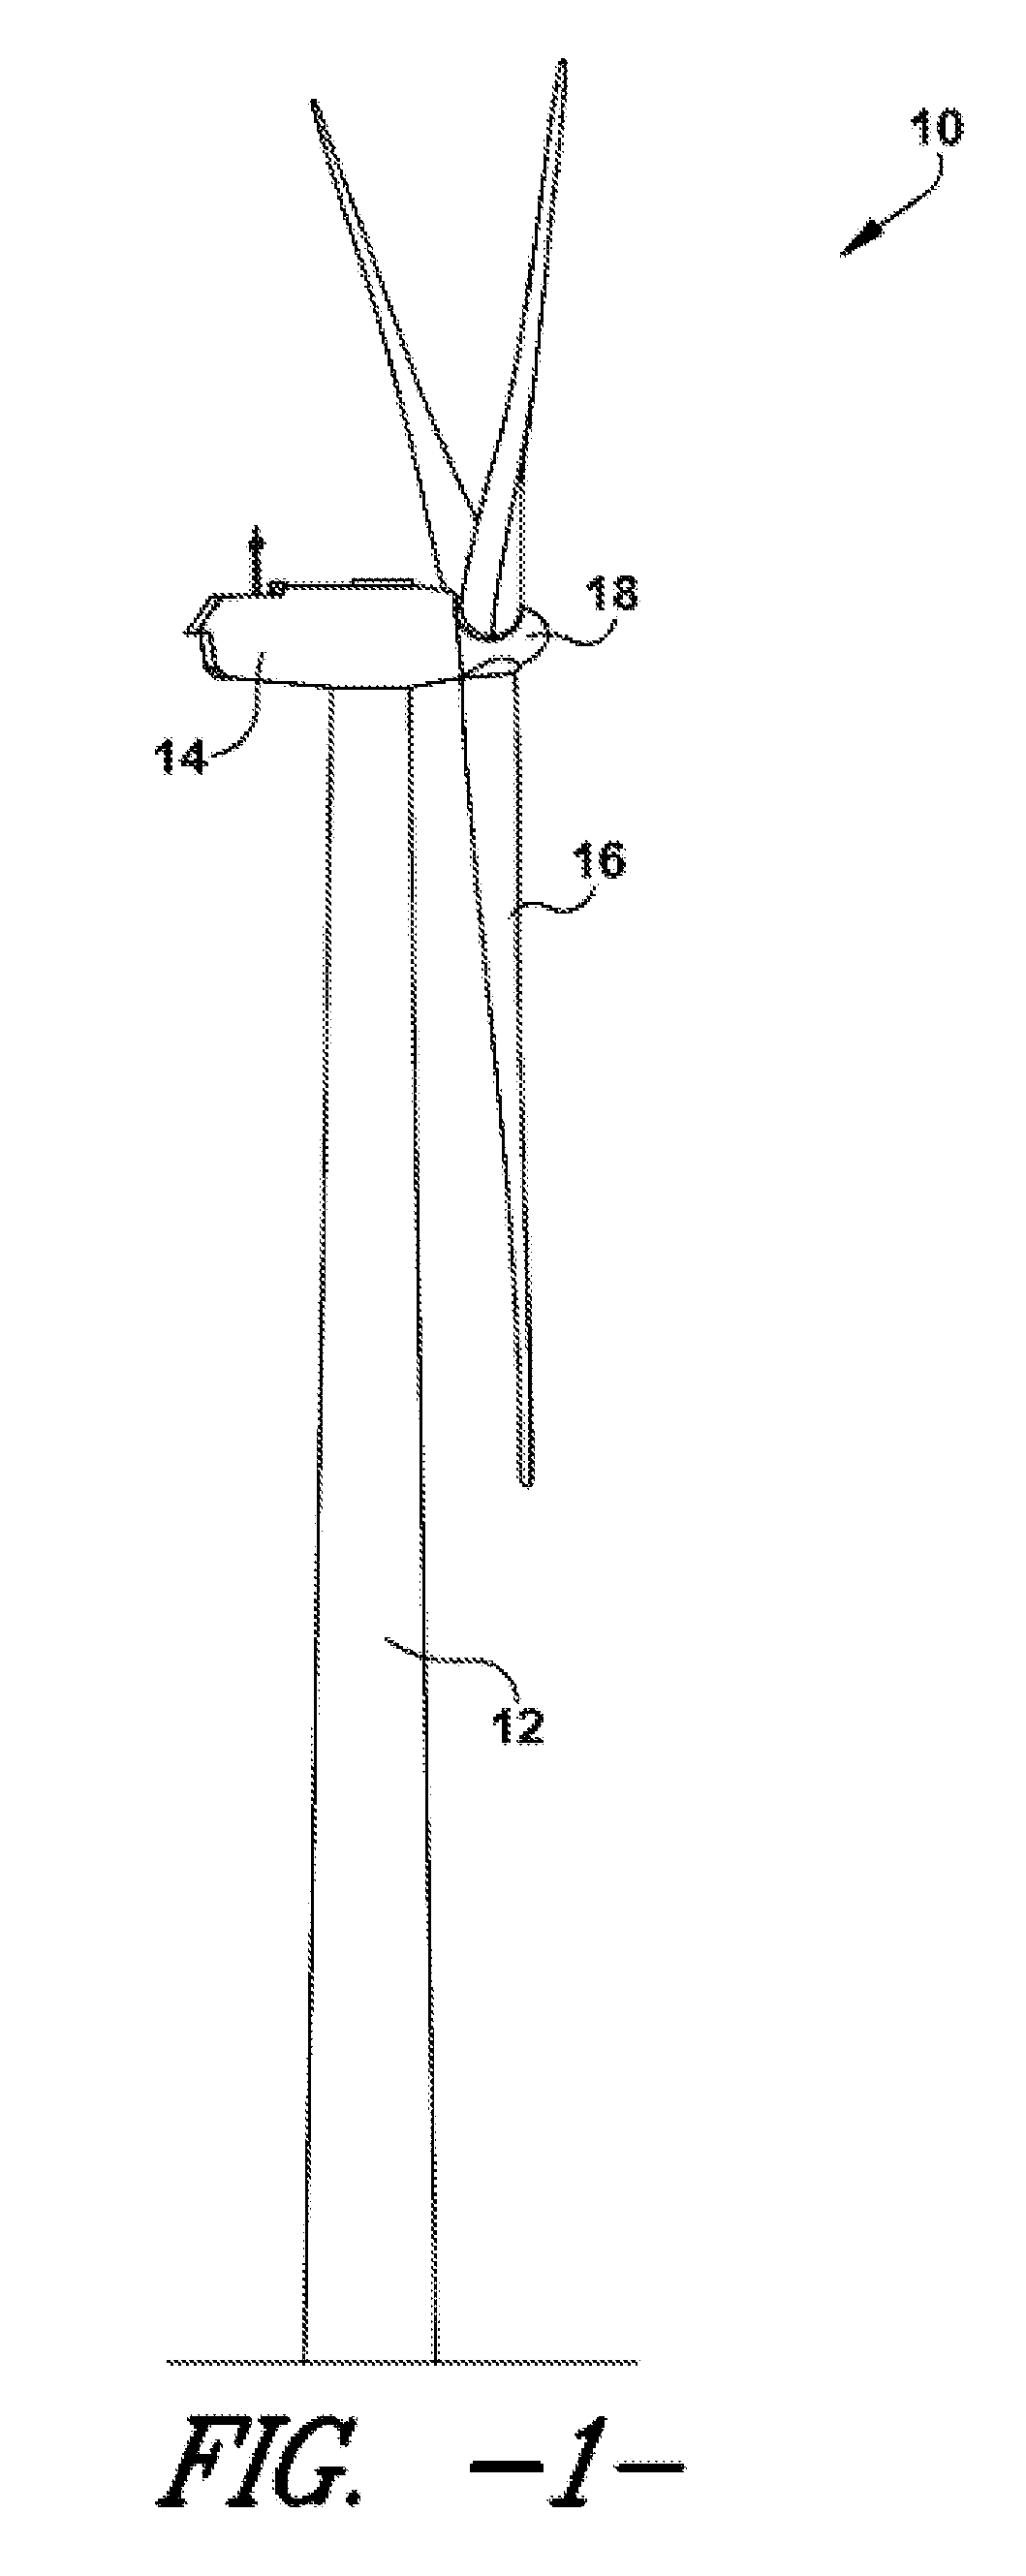 Noise reducer for rotor blade in wind turbine